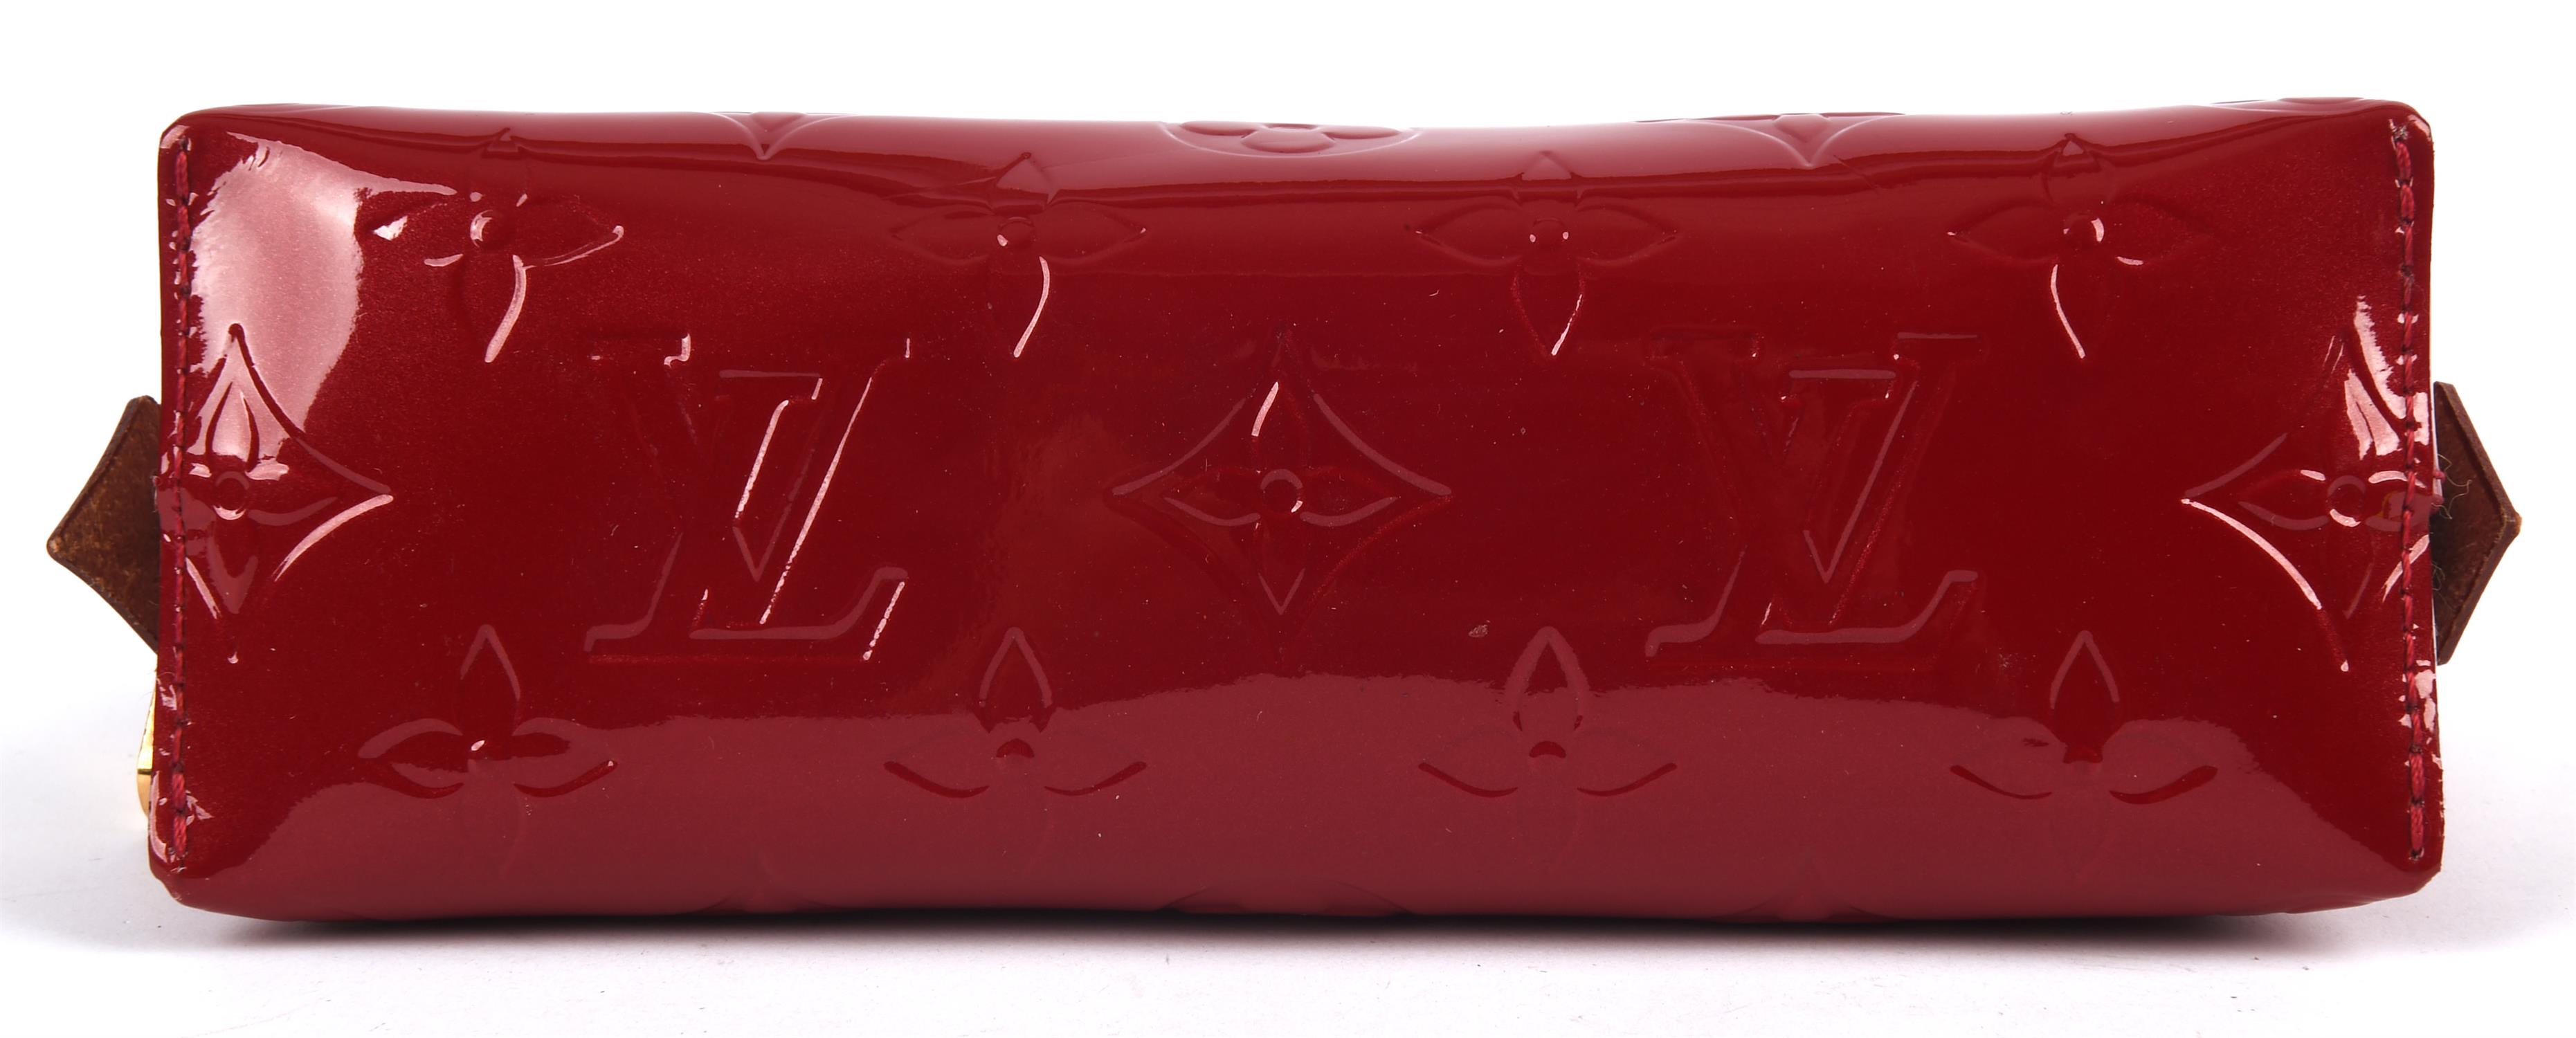 LOUIS VUITTON lipstick red varnished Vernis calf leather make-up bag with dust cloth (17cm x 13cm x - Image 5 of 6